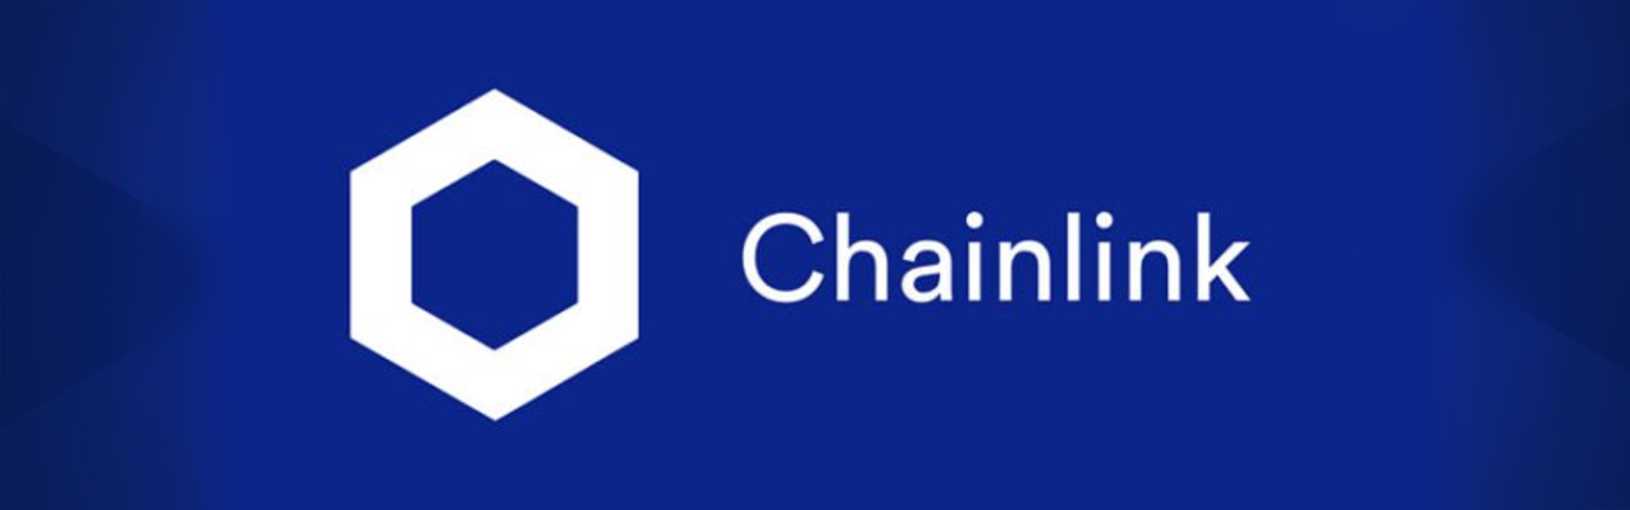 Chainlink Most Overbought Since August — Major LINK Price Cra…